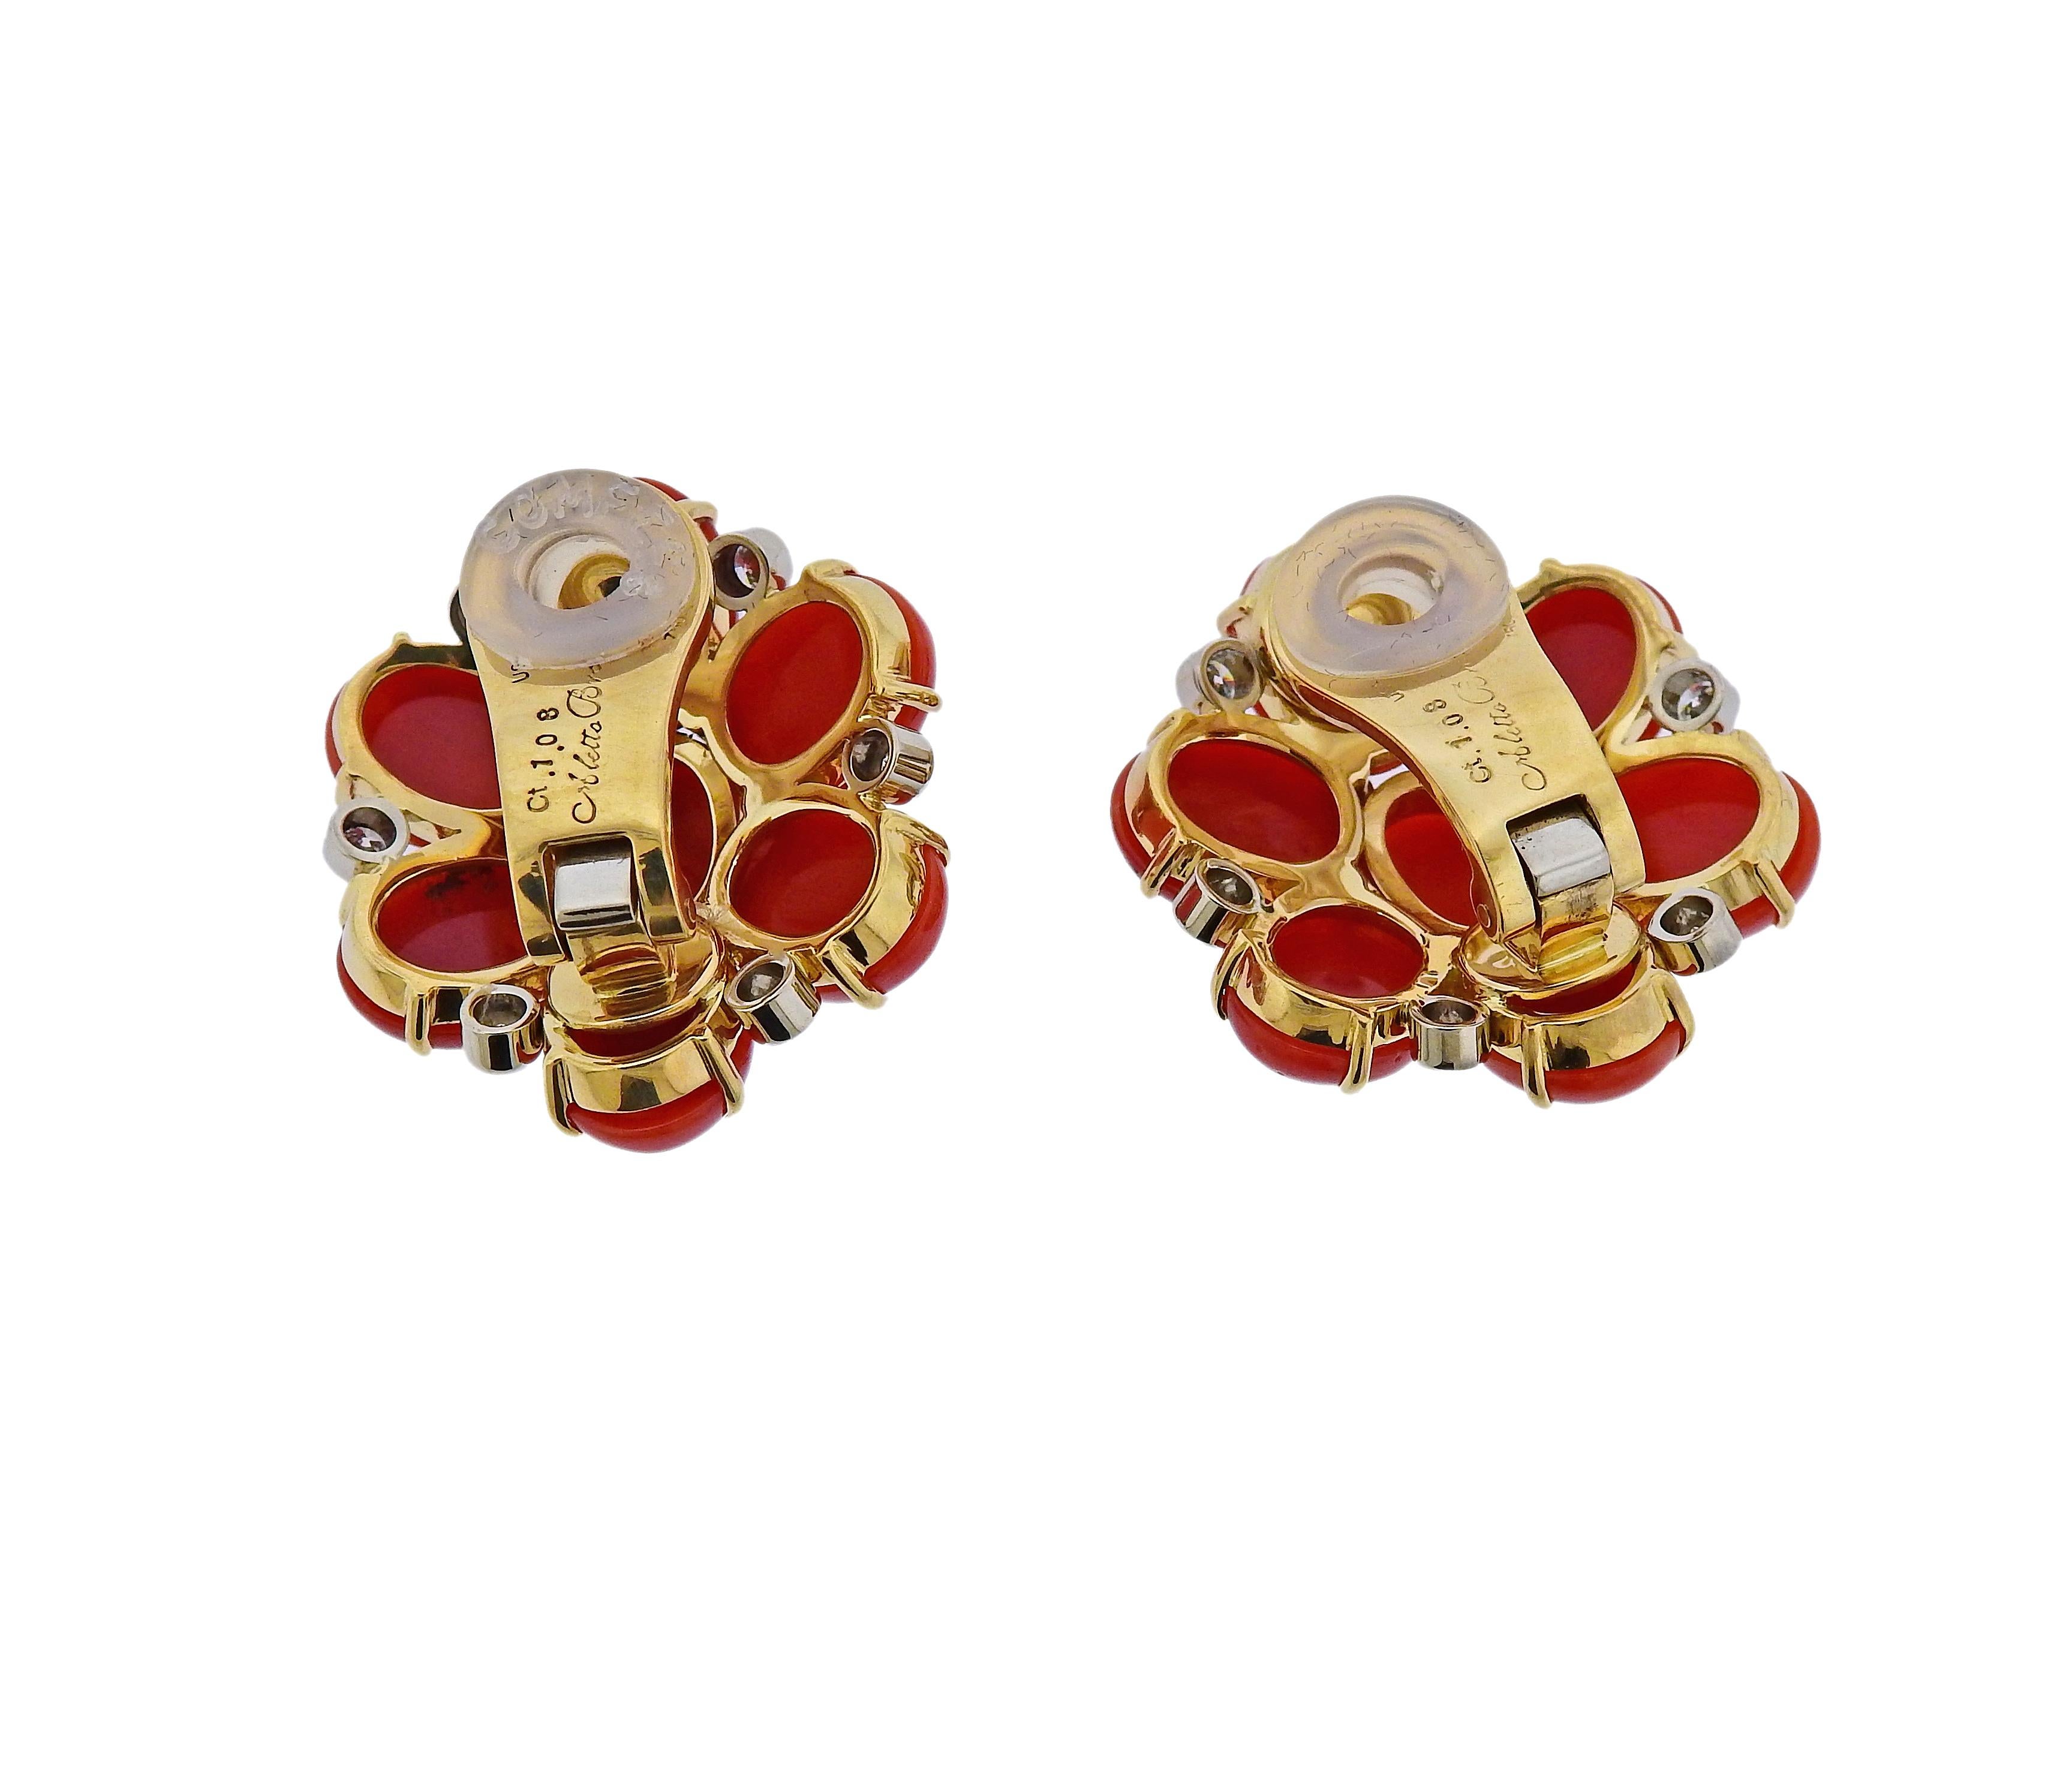 Pair of new 18k yellow gold floral earrings by Aletto Brothers, set with Mediterranean coral and 1.08ctw in VVS-VS/G diamonds. Earrings are 27mm x 25mm.  Weigh 26.6 grams. Marked: USA, ct 1.08, 750, Aletto Bros.